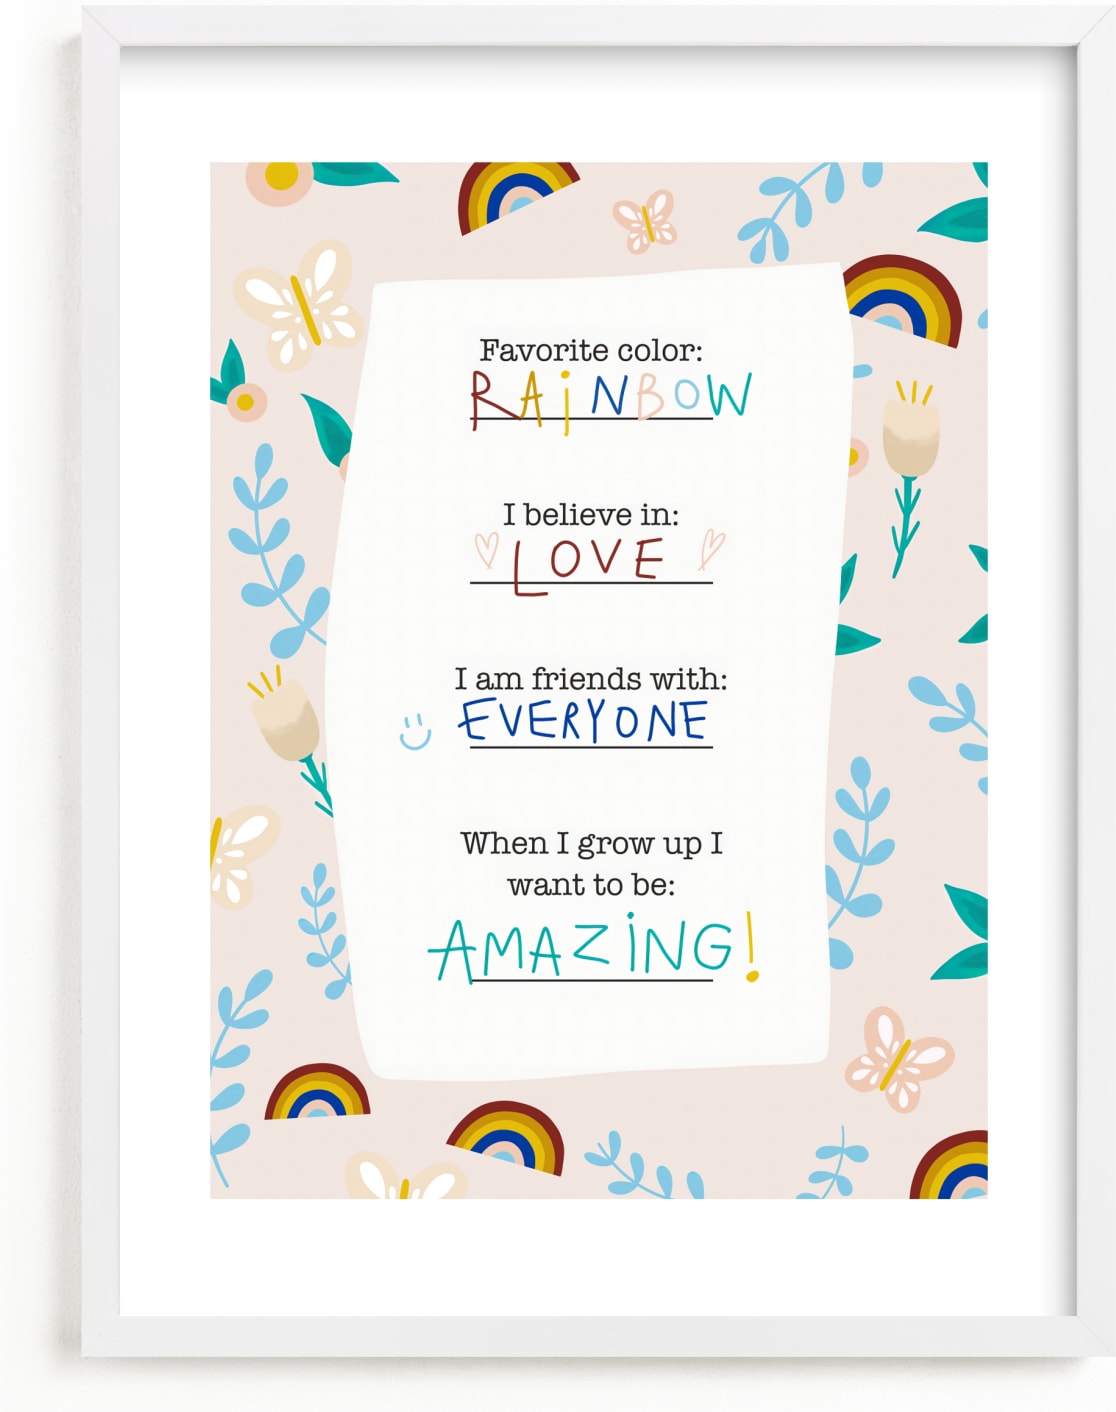 This is a colorful kids wall art by Naava Katz called All About Me.